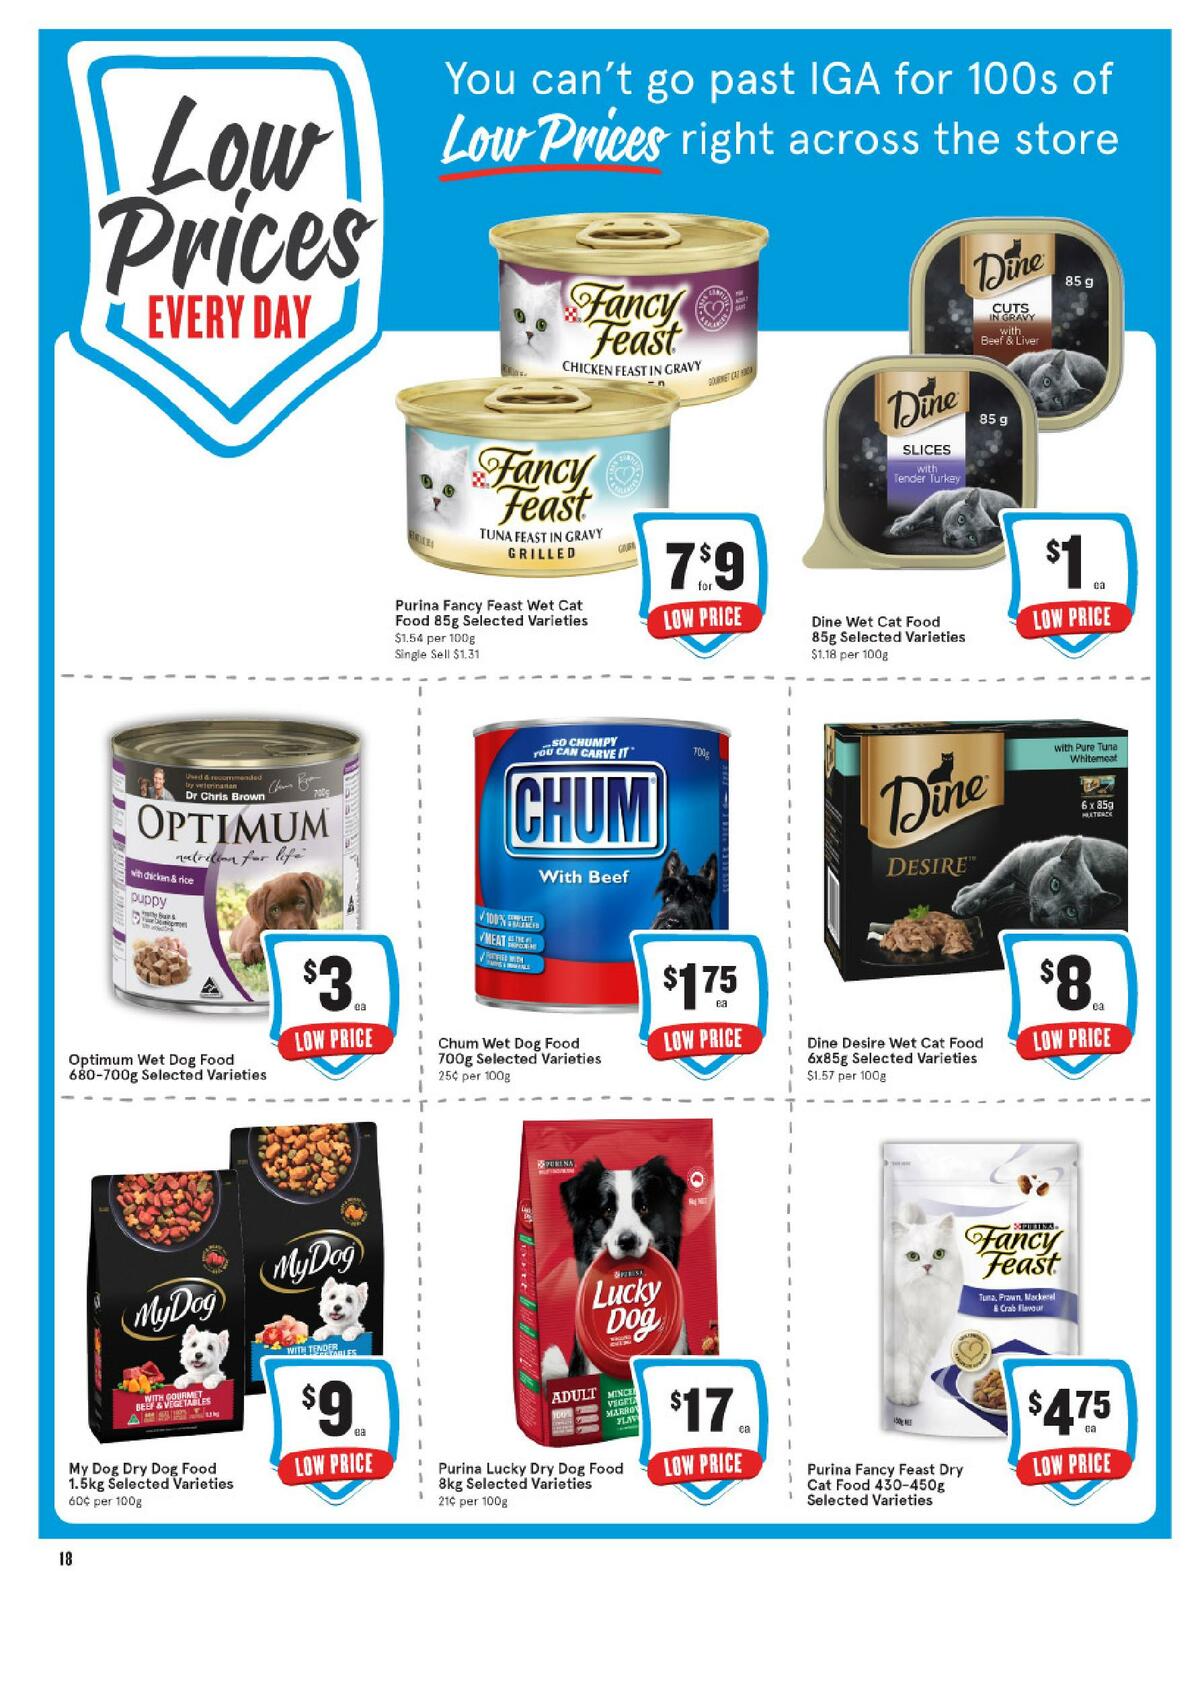 IGA Low Prices Every Day Catalogues from 24 February